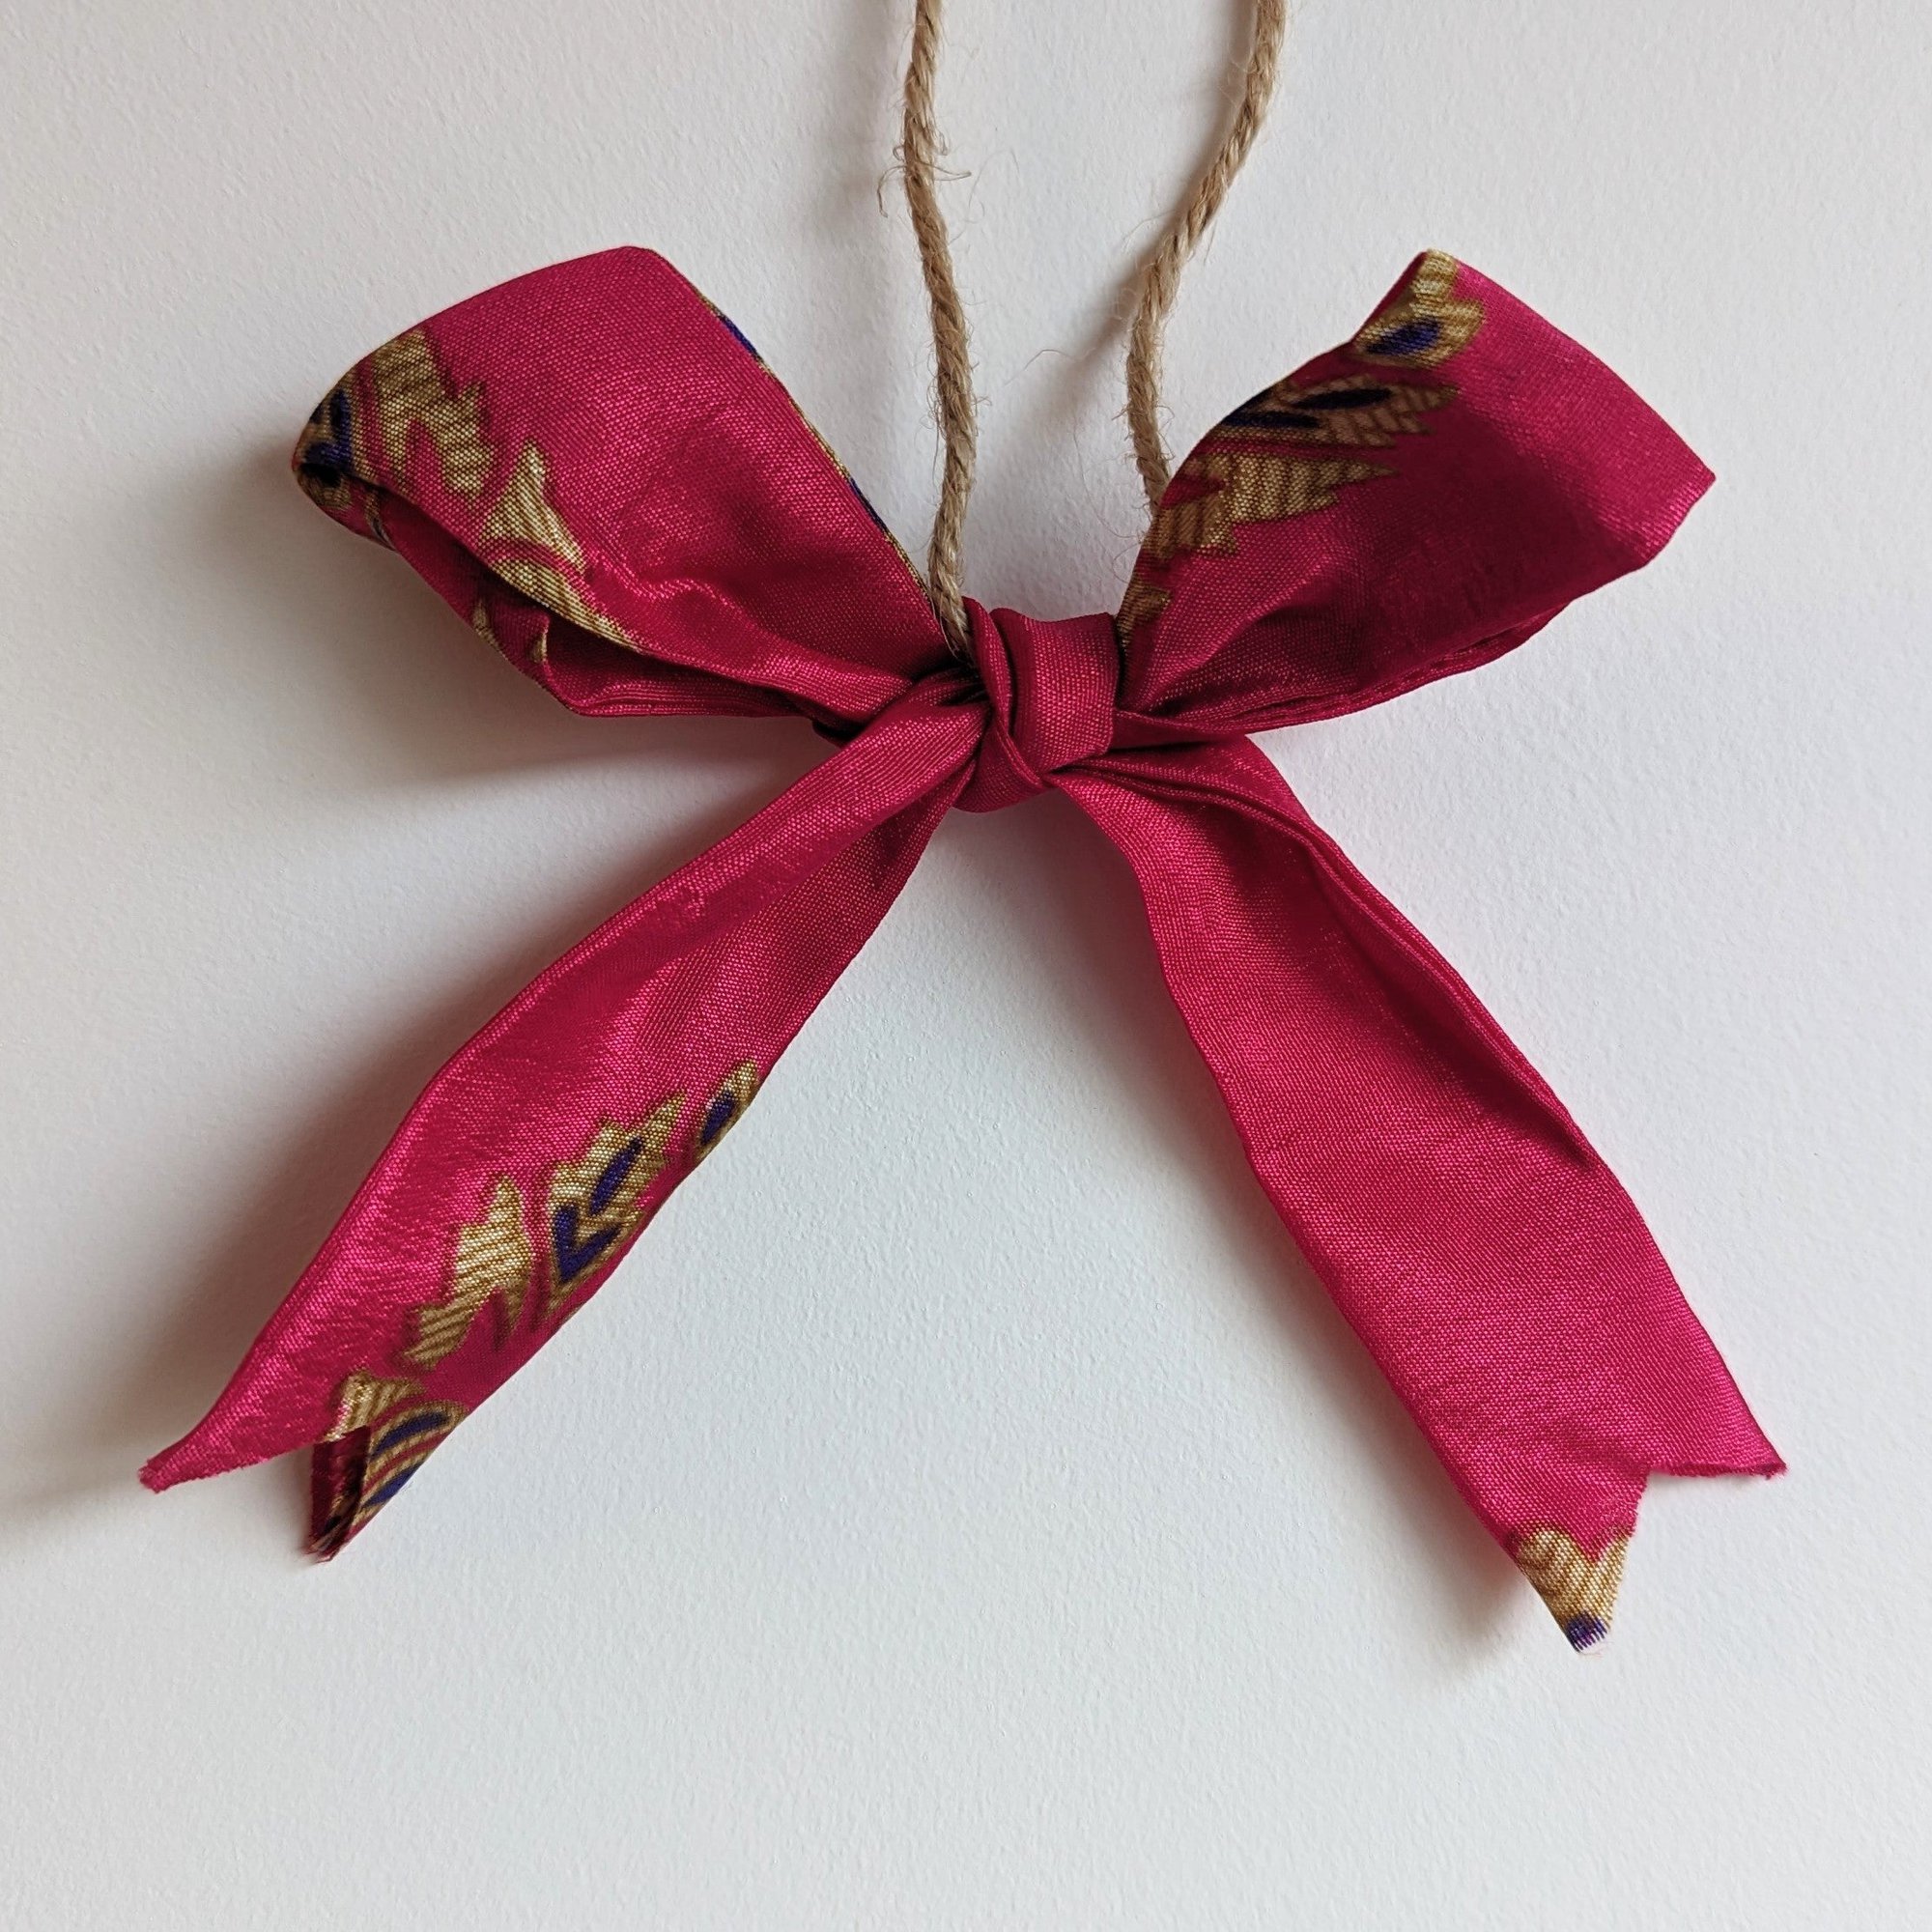 Upcycled Sari Bow Decorations 4 Pack